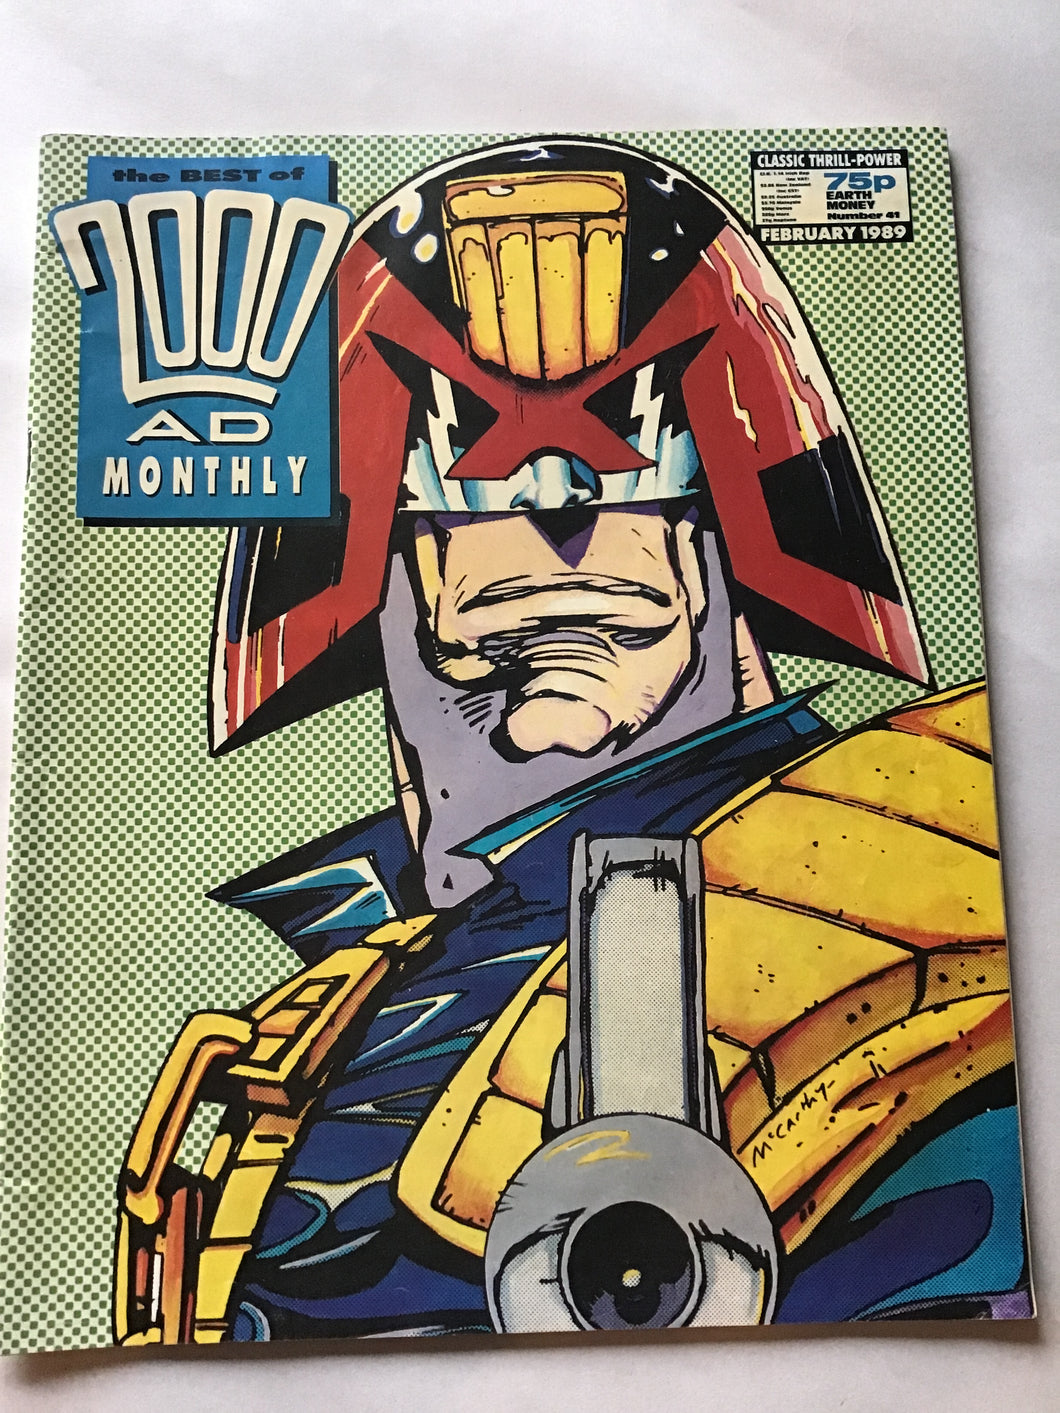 2000 AD monthly February 19 89 November 41 used to good